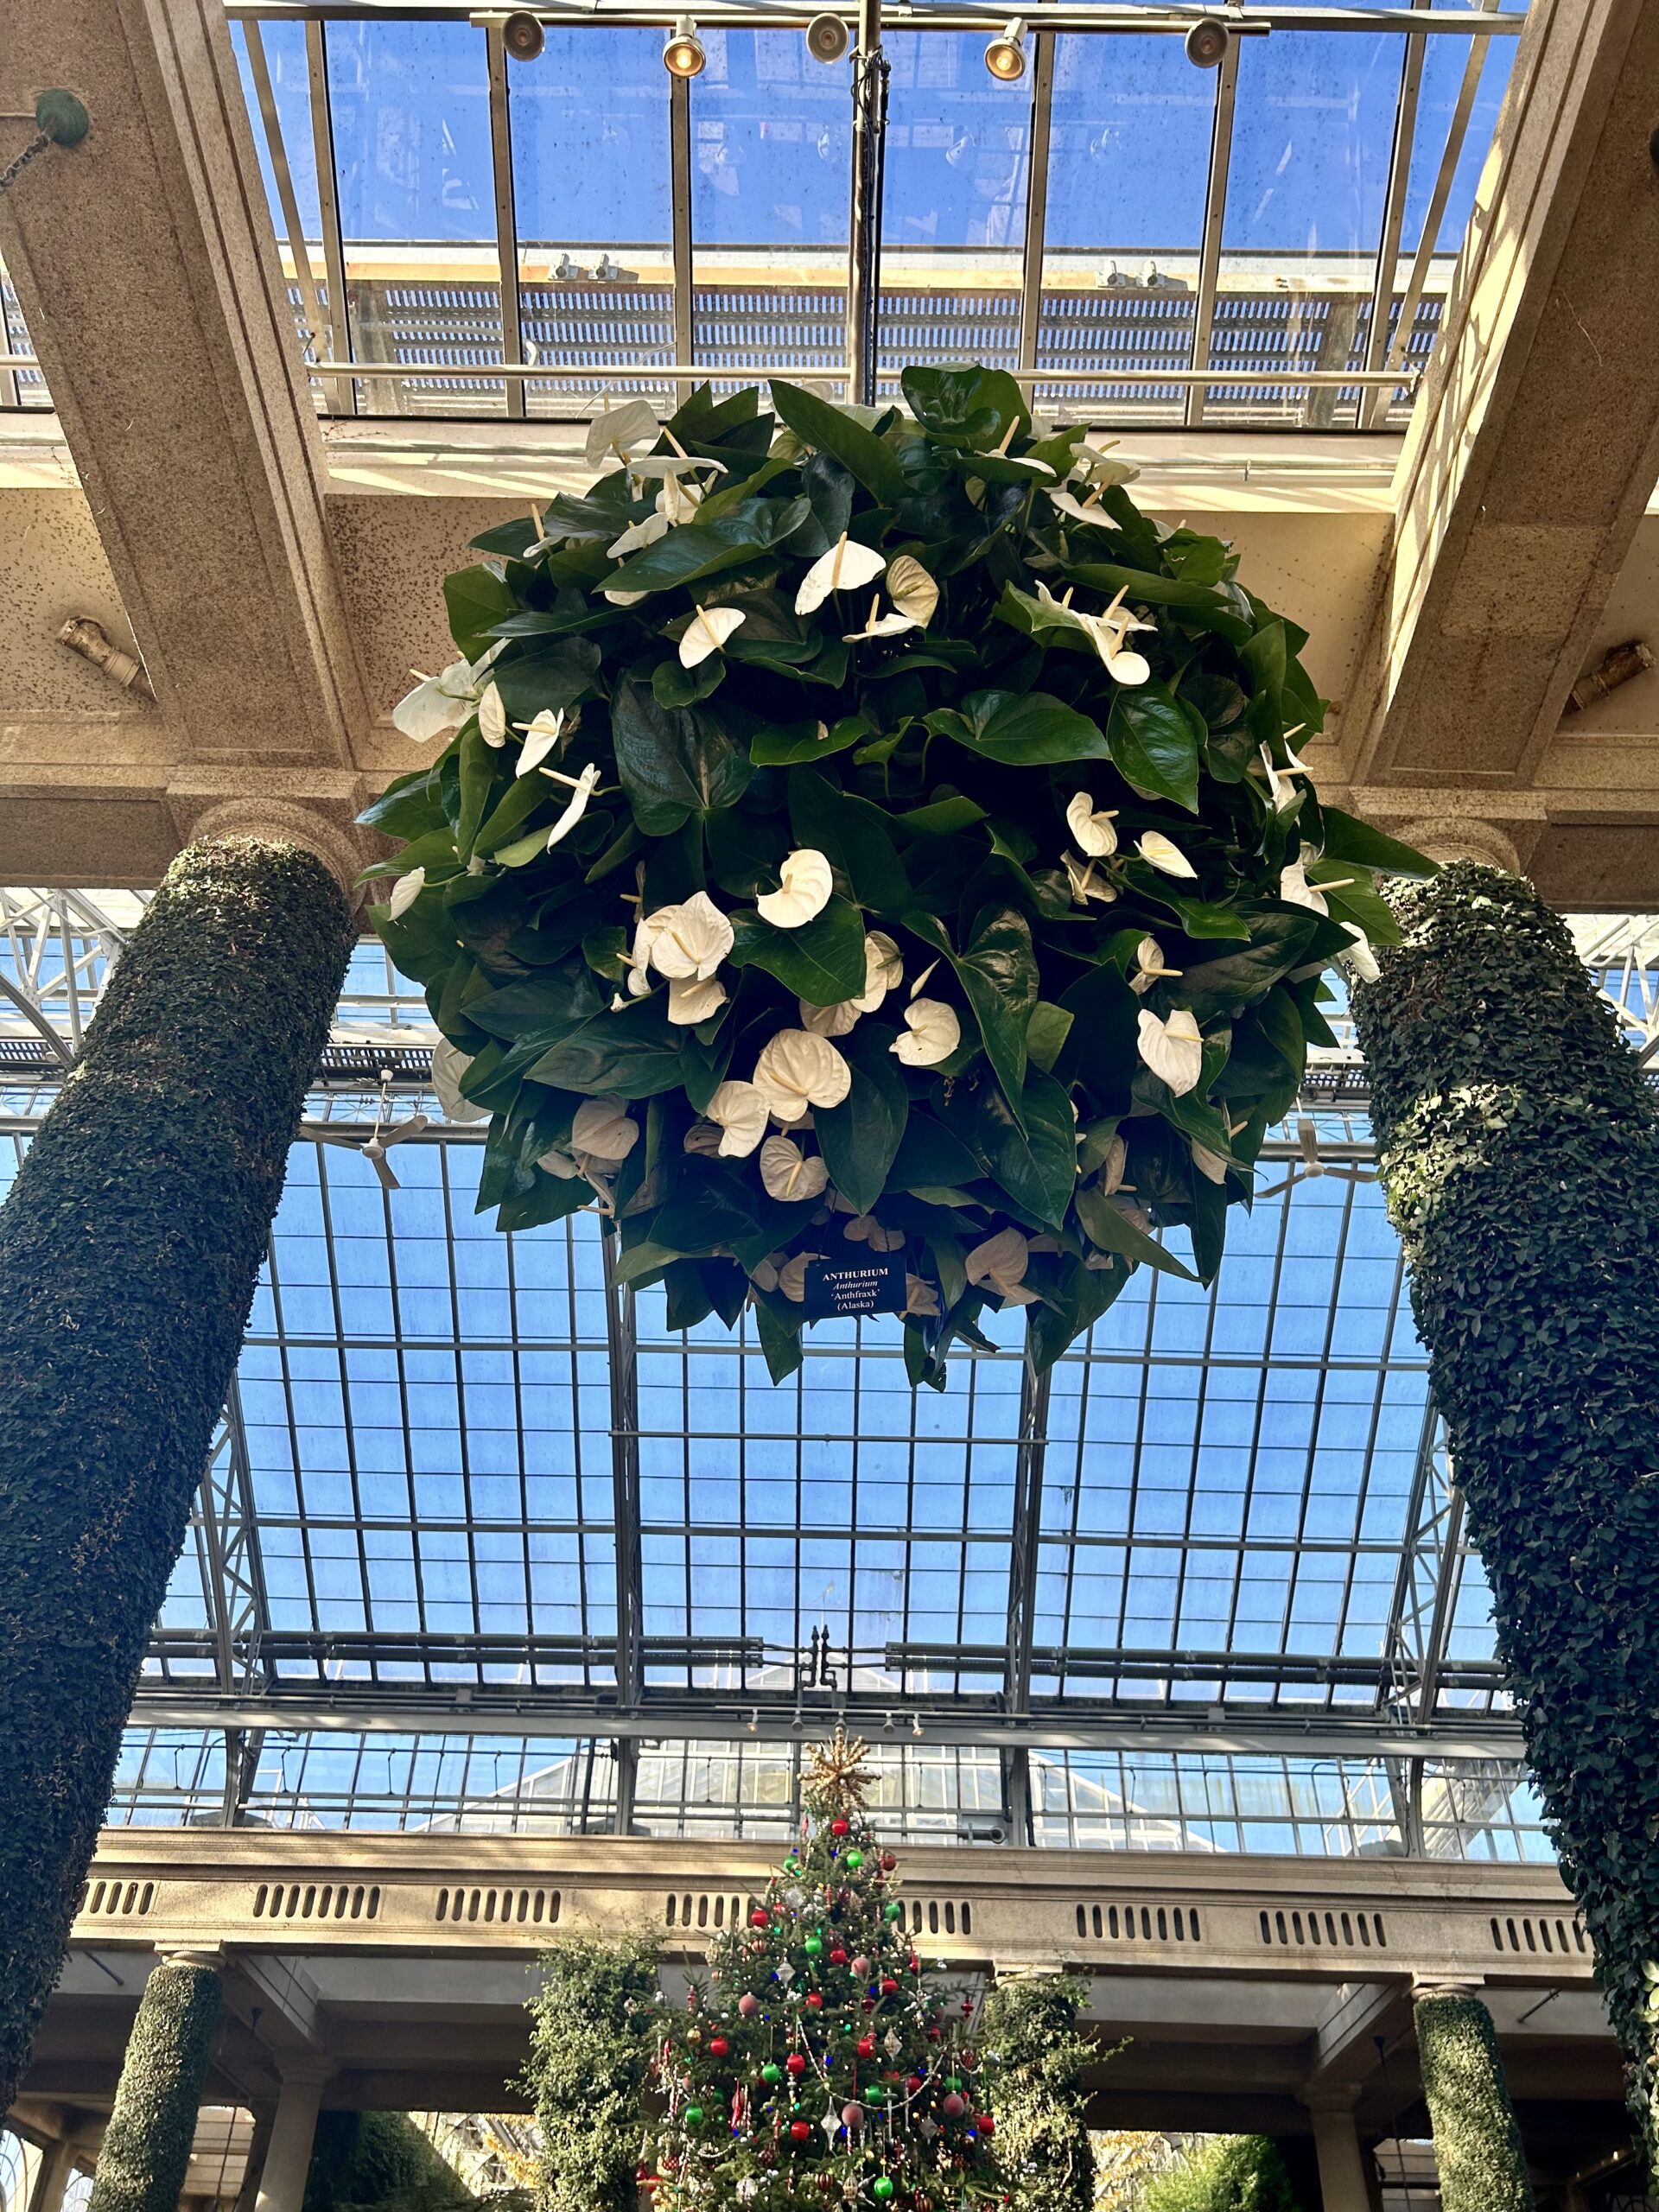 Hanging Anthurium White in the Conservatory at Longwood Gardens